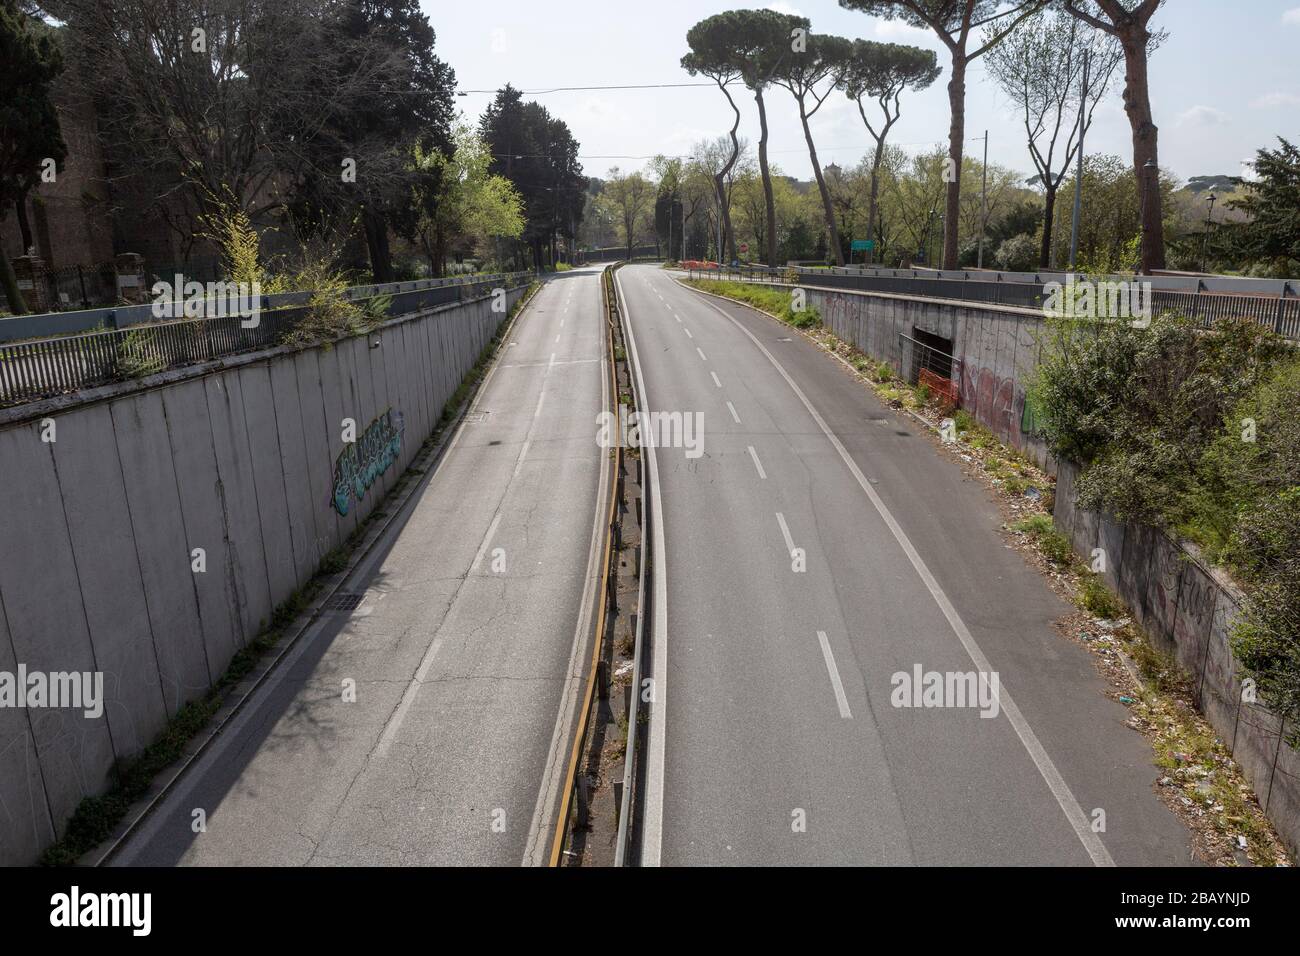 Rome, Italy, 29, Mar, 2020. Zero traffic on the usually congested Muro Torto Road. Italy has been in total lockdown for nearly three weeks due to the Coronavirus Covid-19 pandemic. Credit: Stephen Bisgrove/Alamy Live News Stock Photo